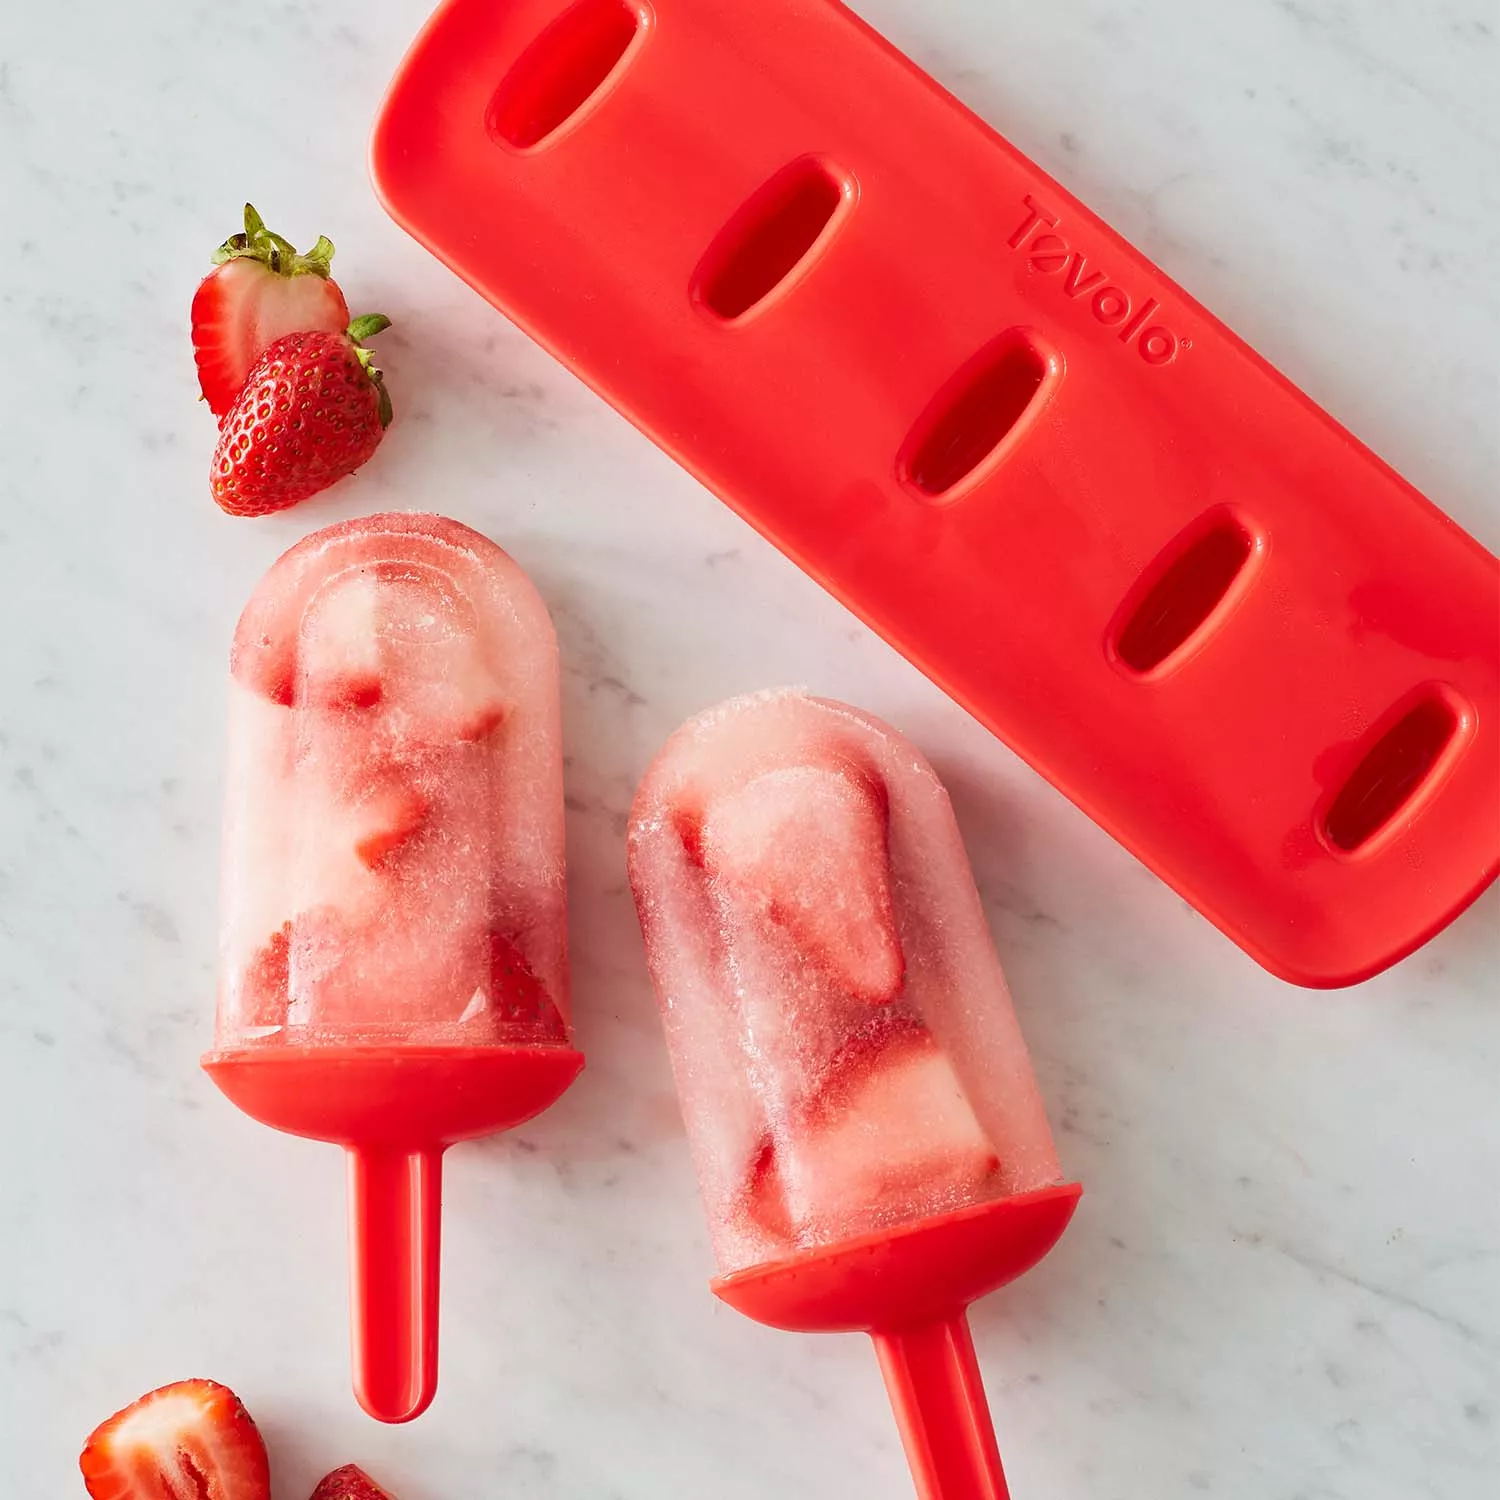 Tovolo Twin Pops Popsicle Mold - Whisk